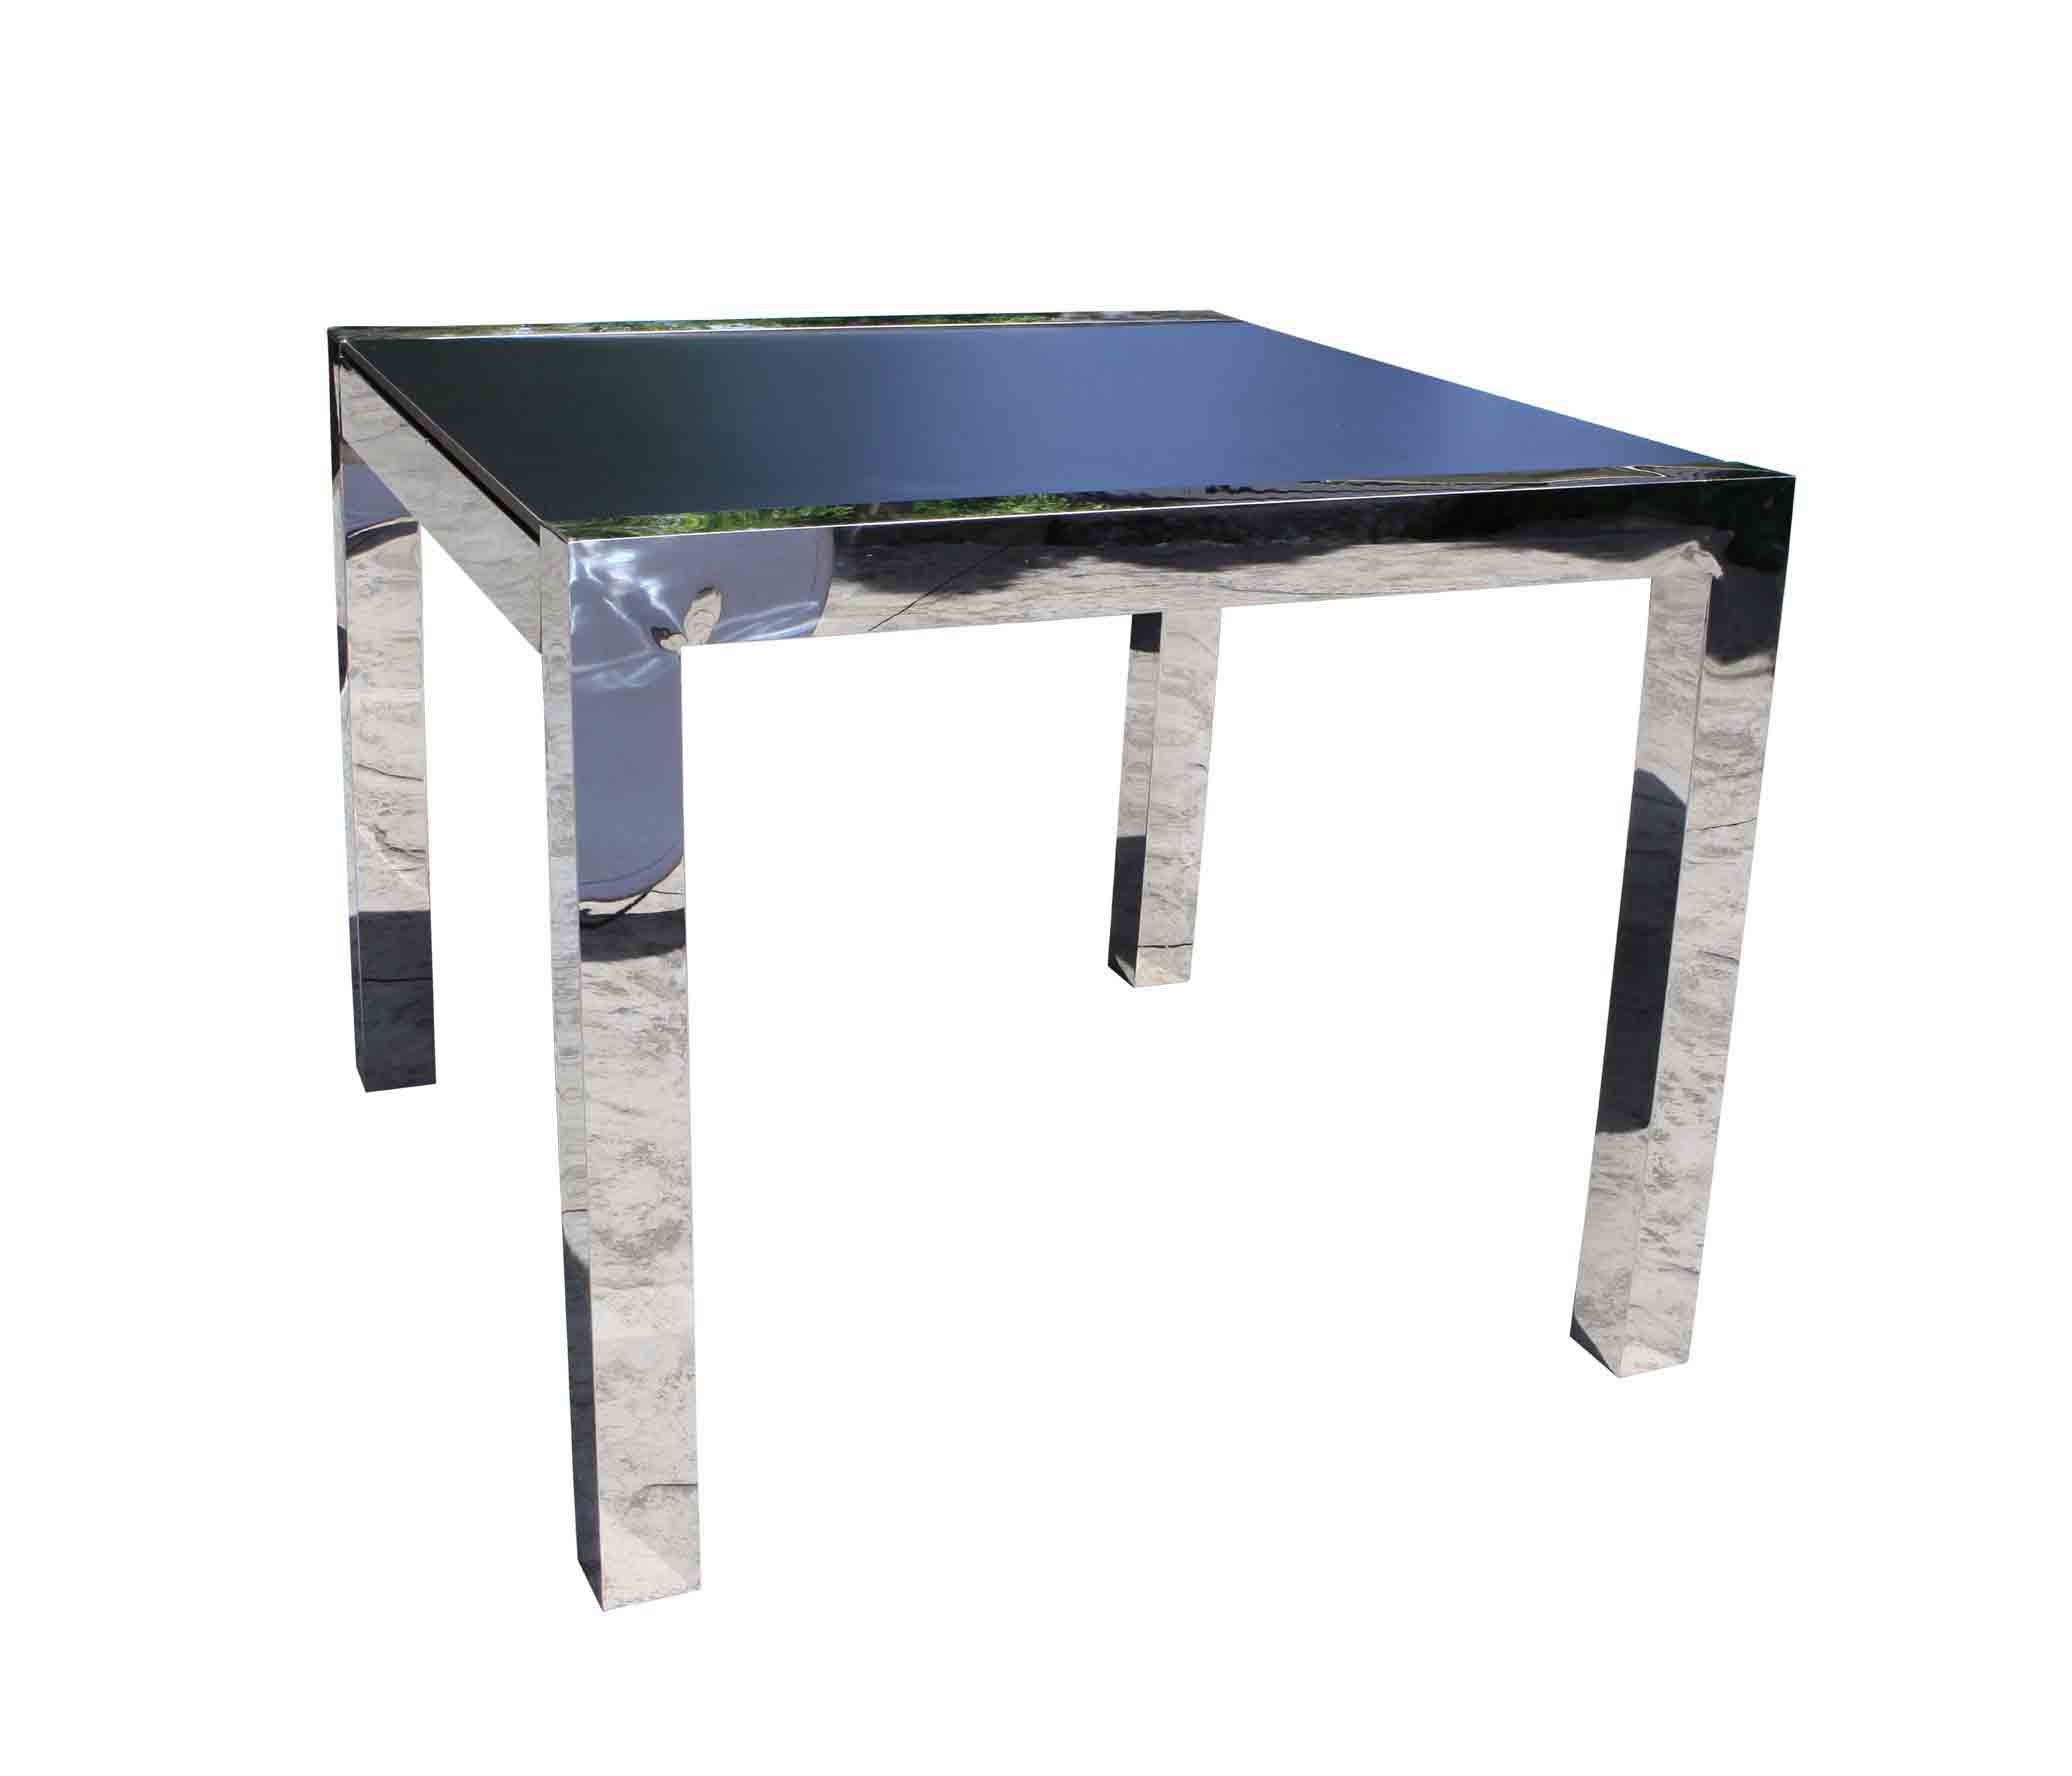 Sidney 36" Square Table